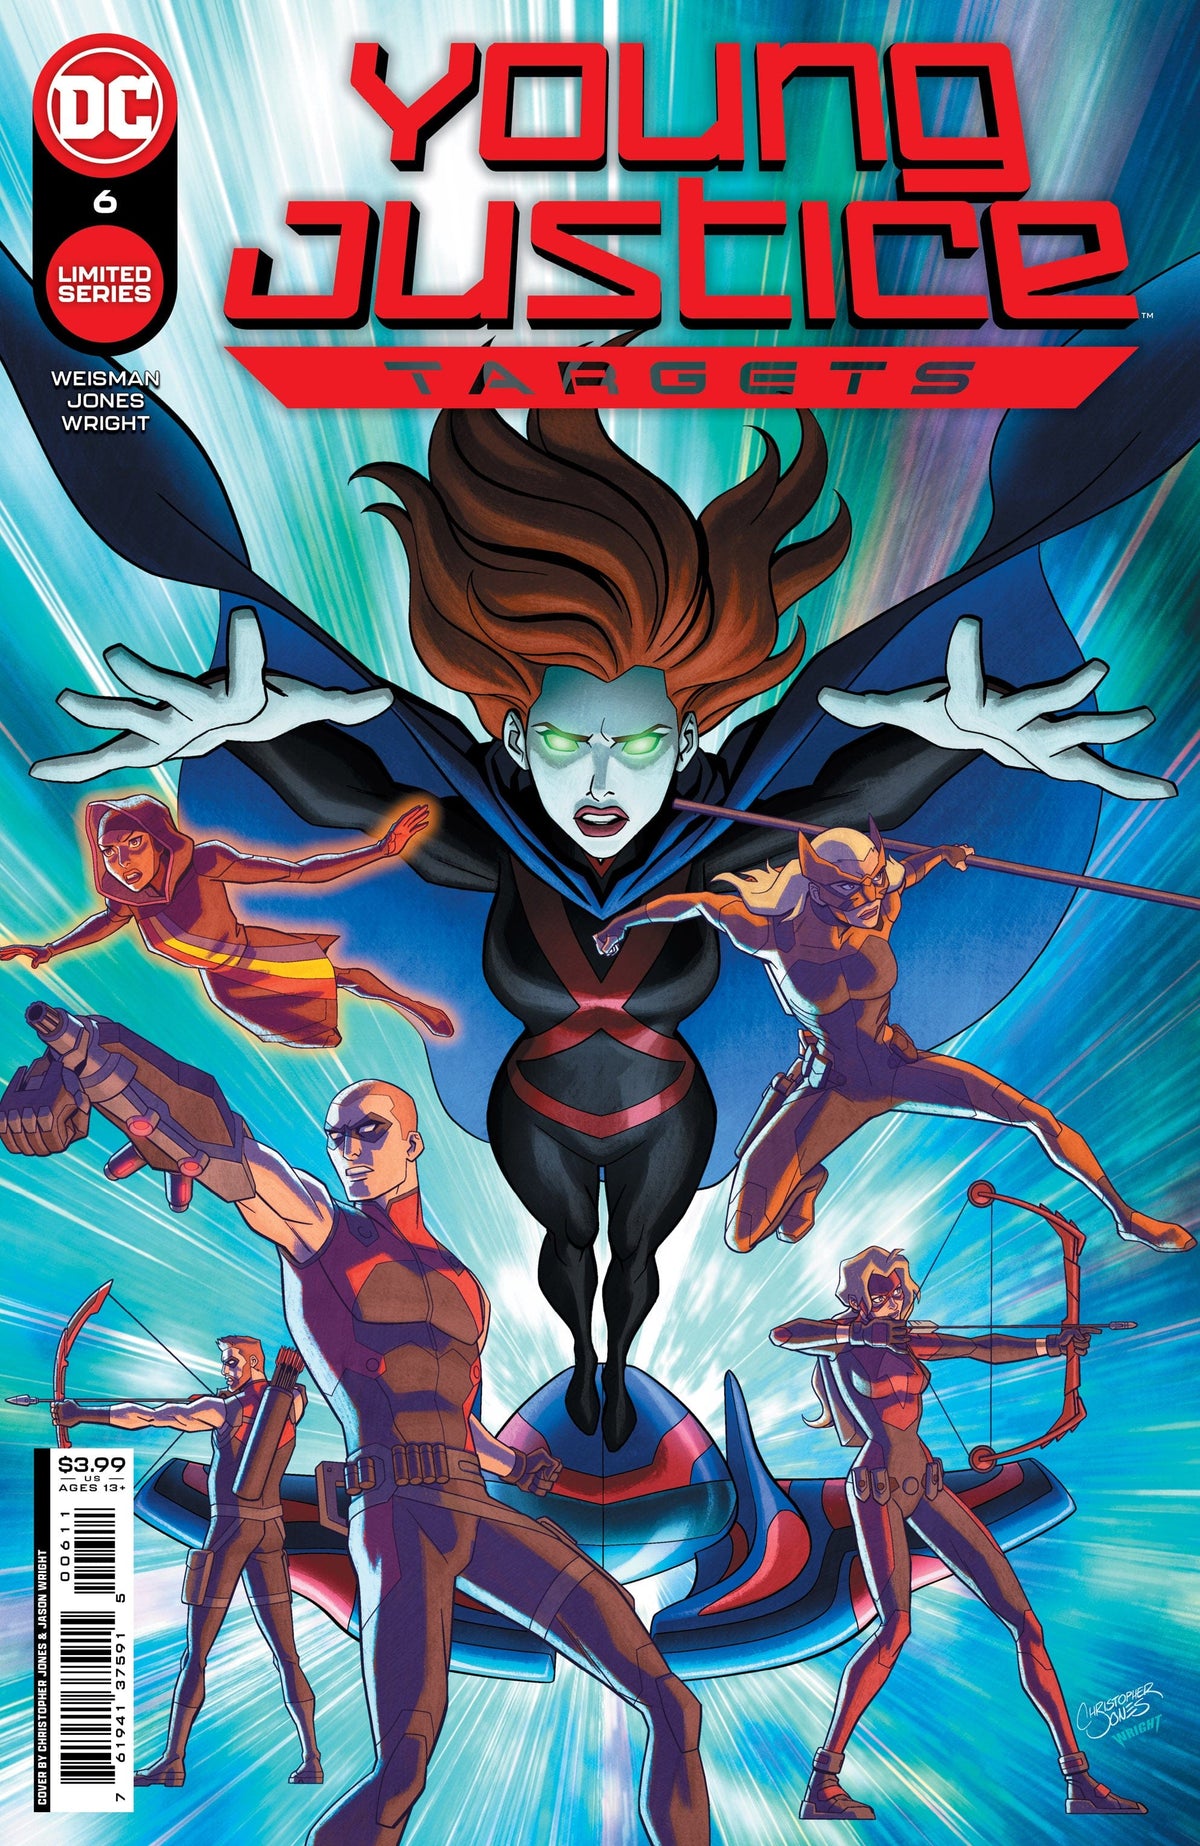 YOUNG JUSTICE TARGETS #6 (OF 6) CVR A CHRISTOPHER JONES - Third Eye